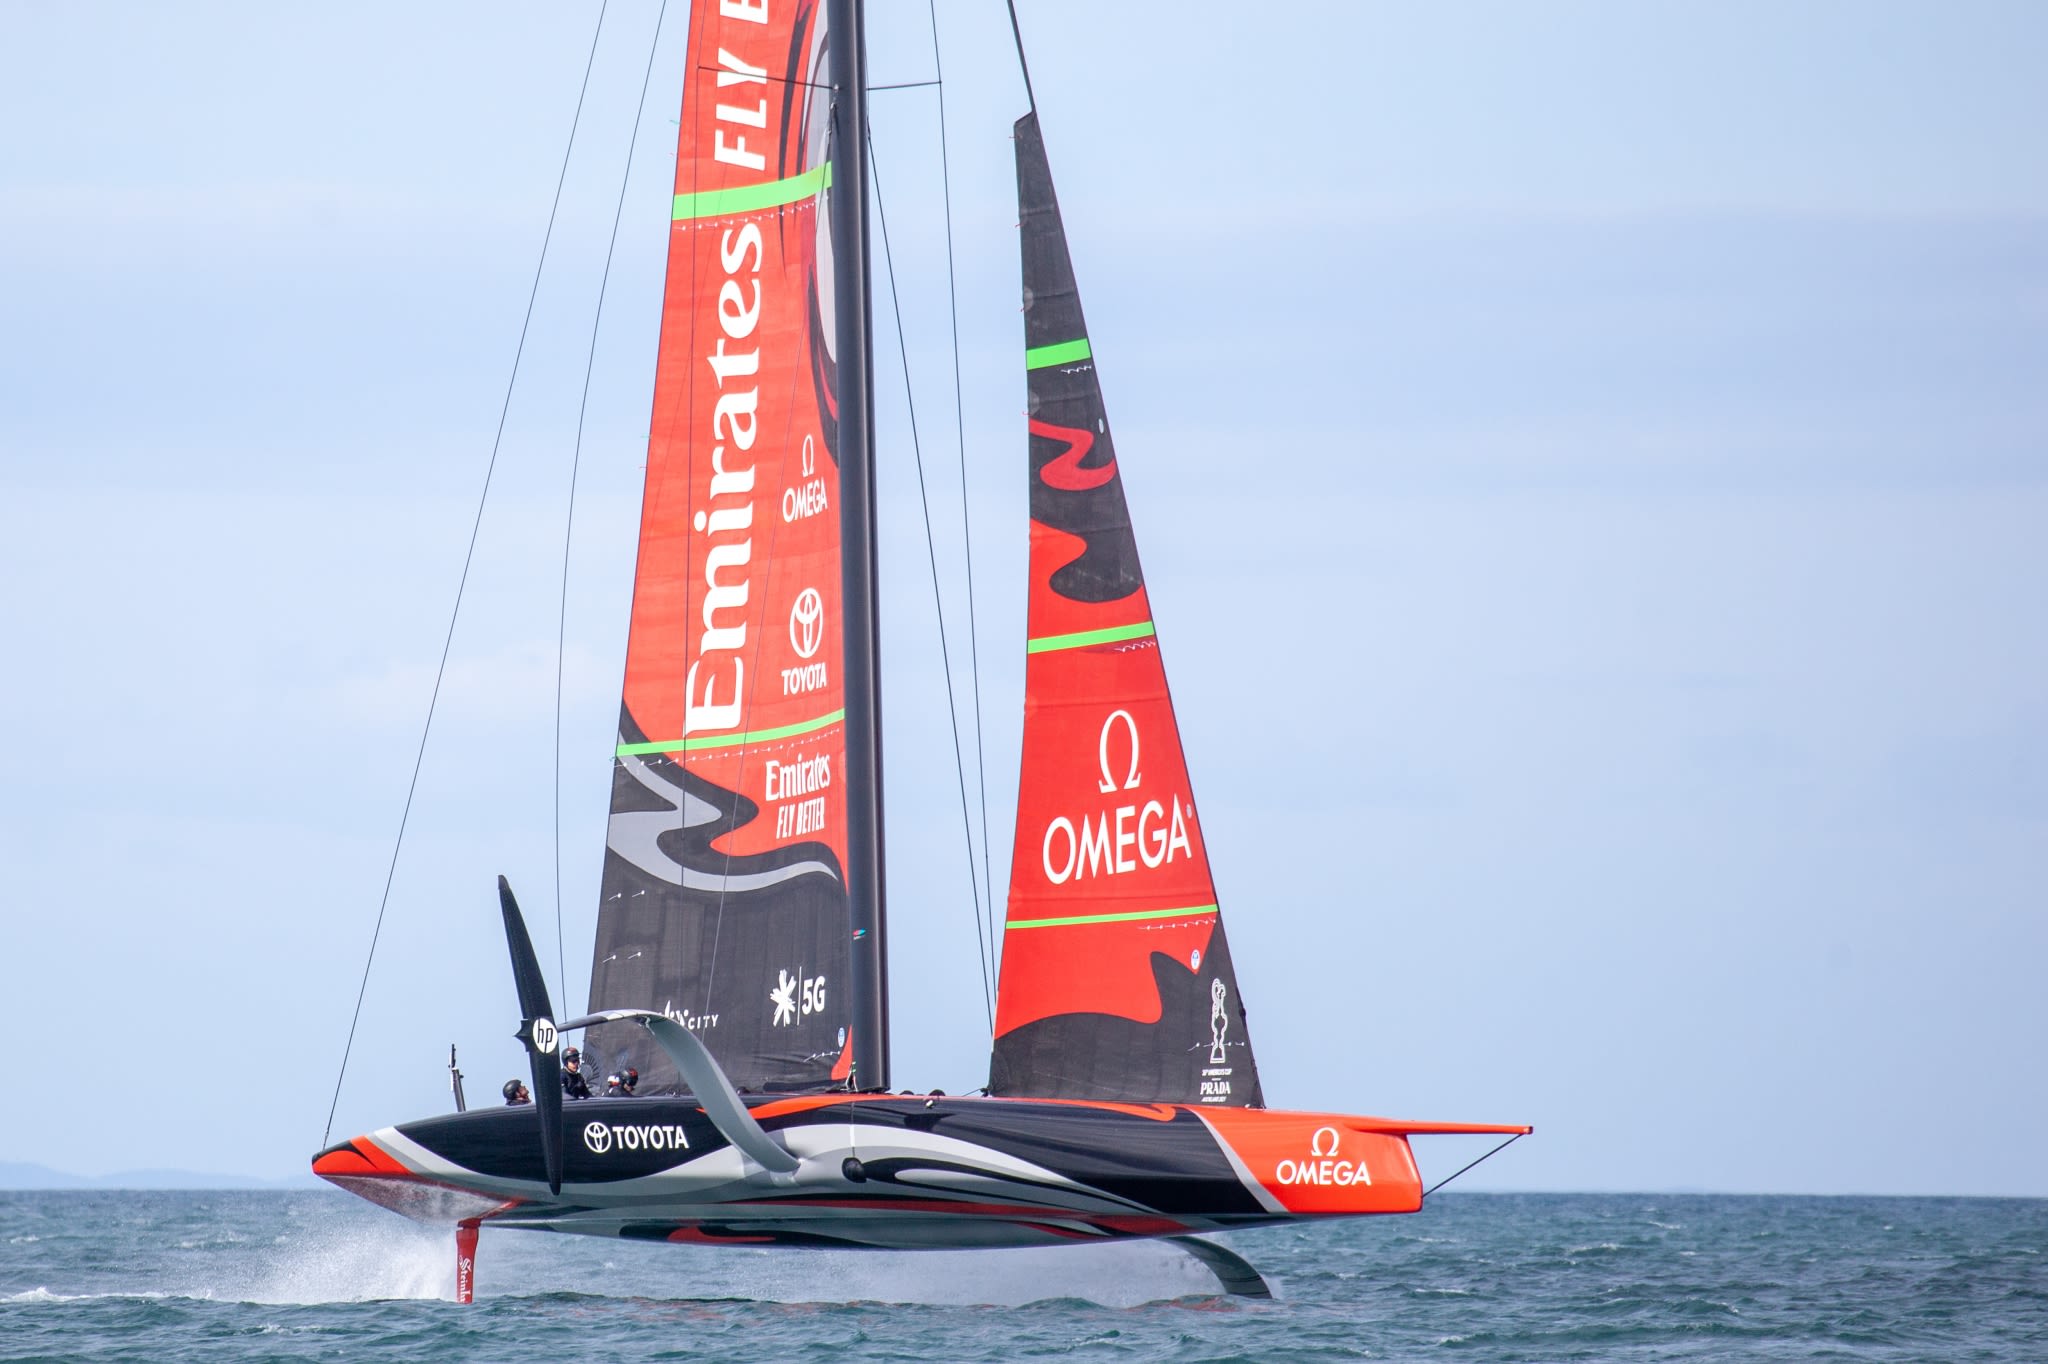 The History of our America's Cup Yachts